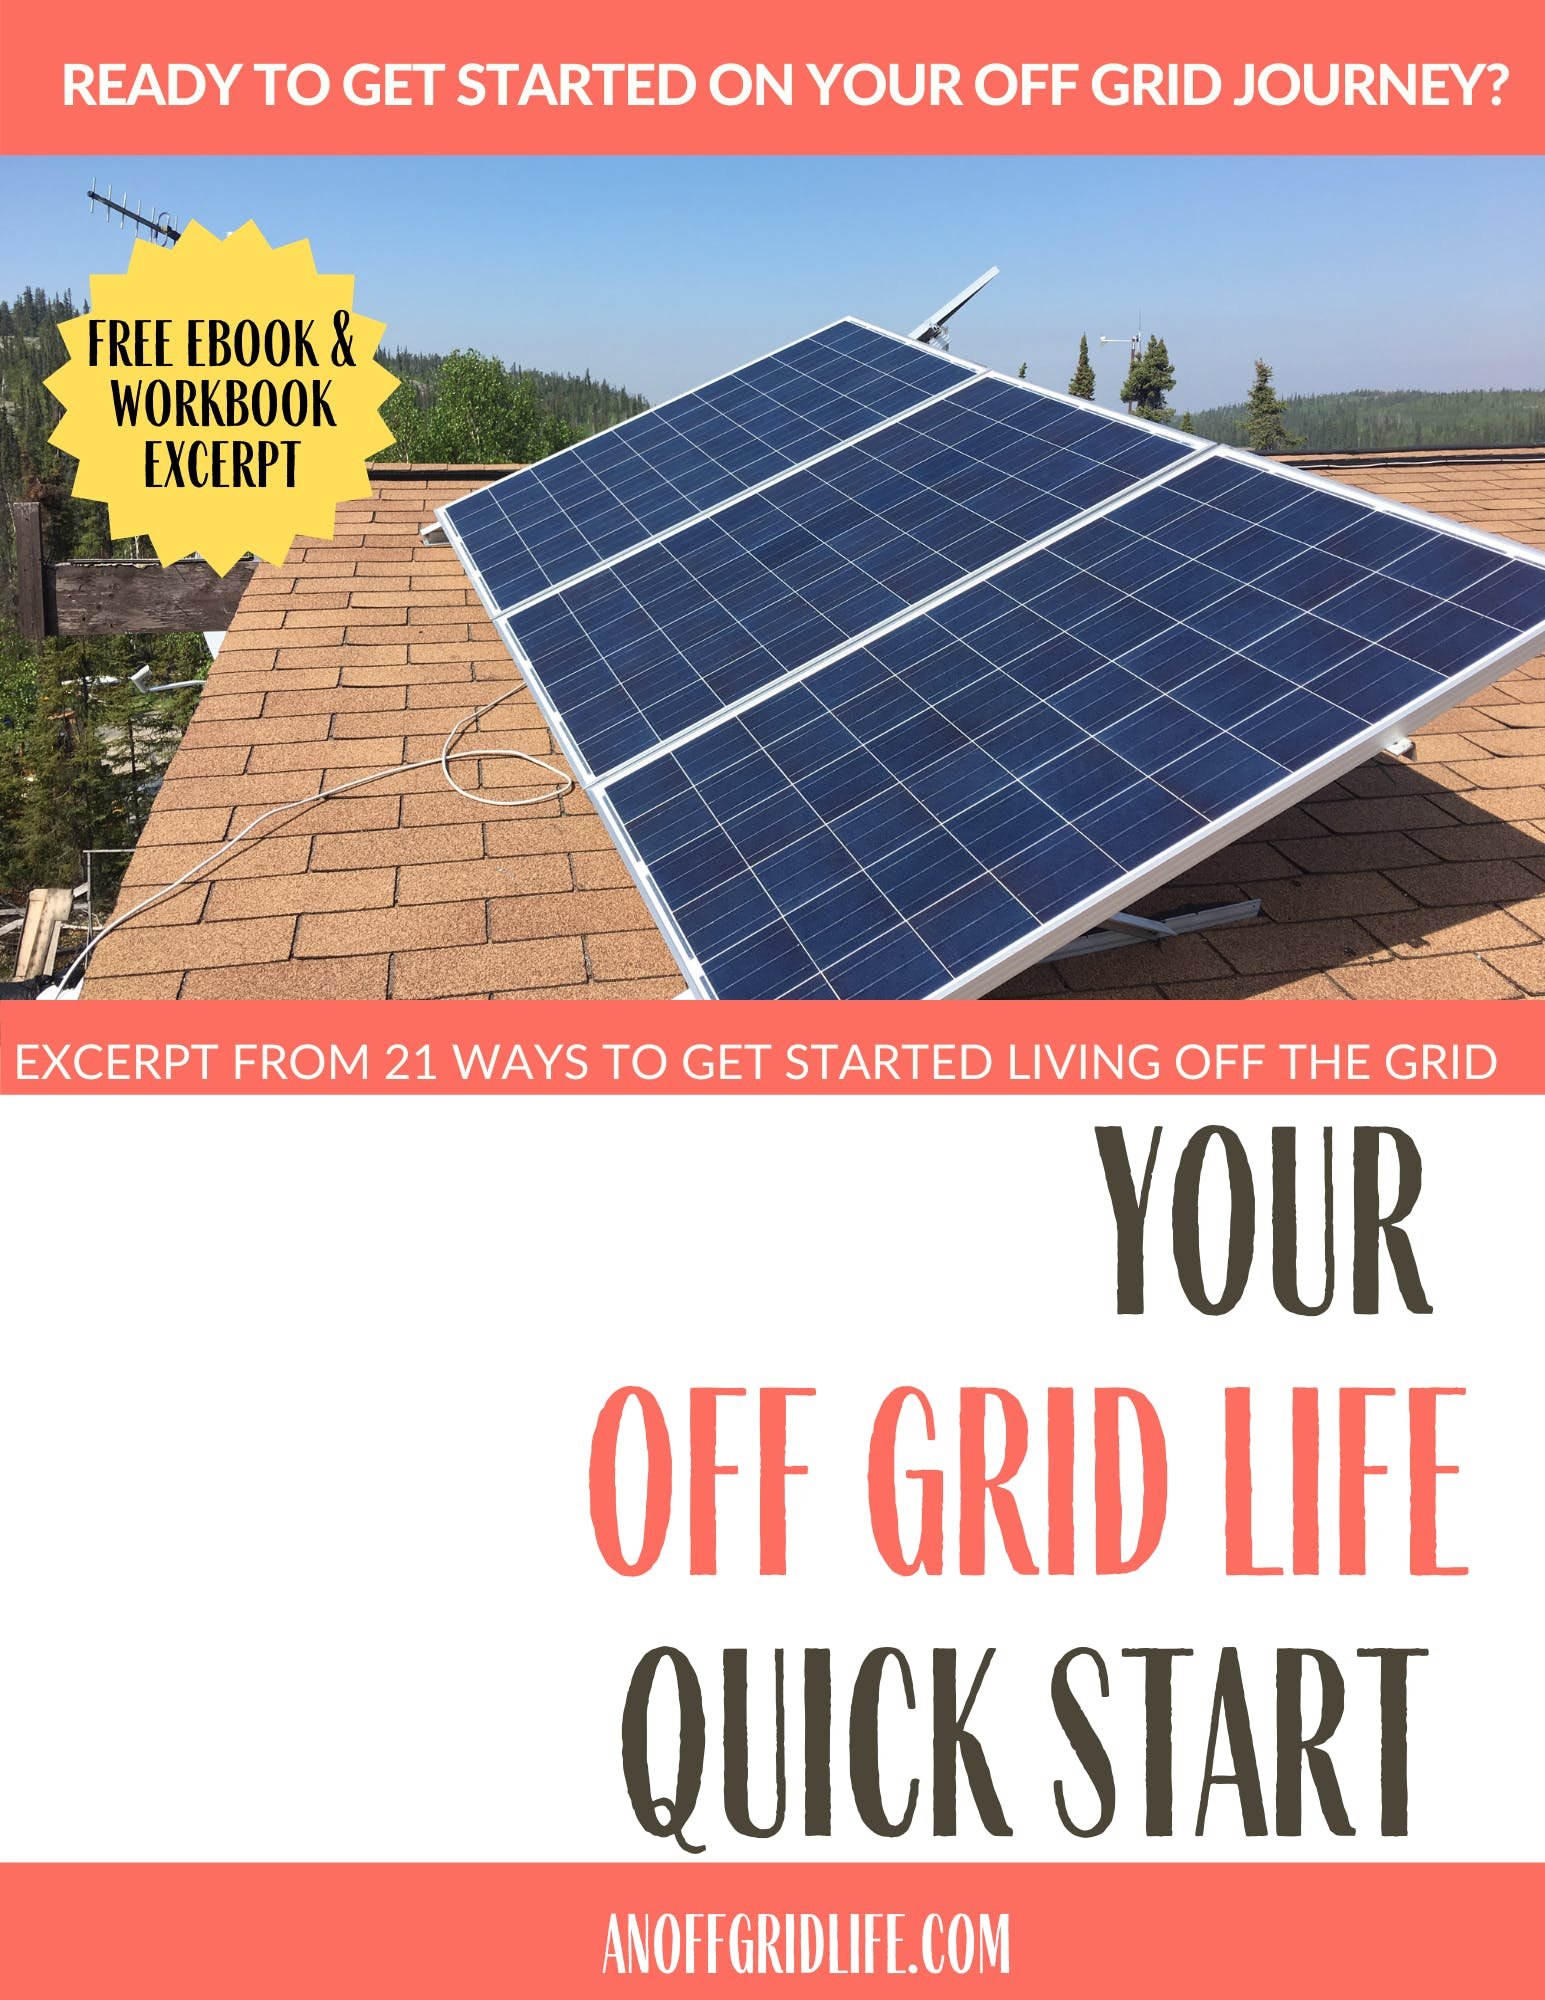 Ready to get started on your dreams of moving off the grid?